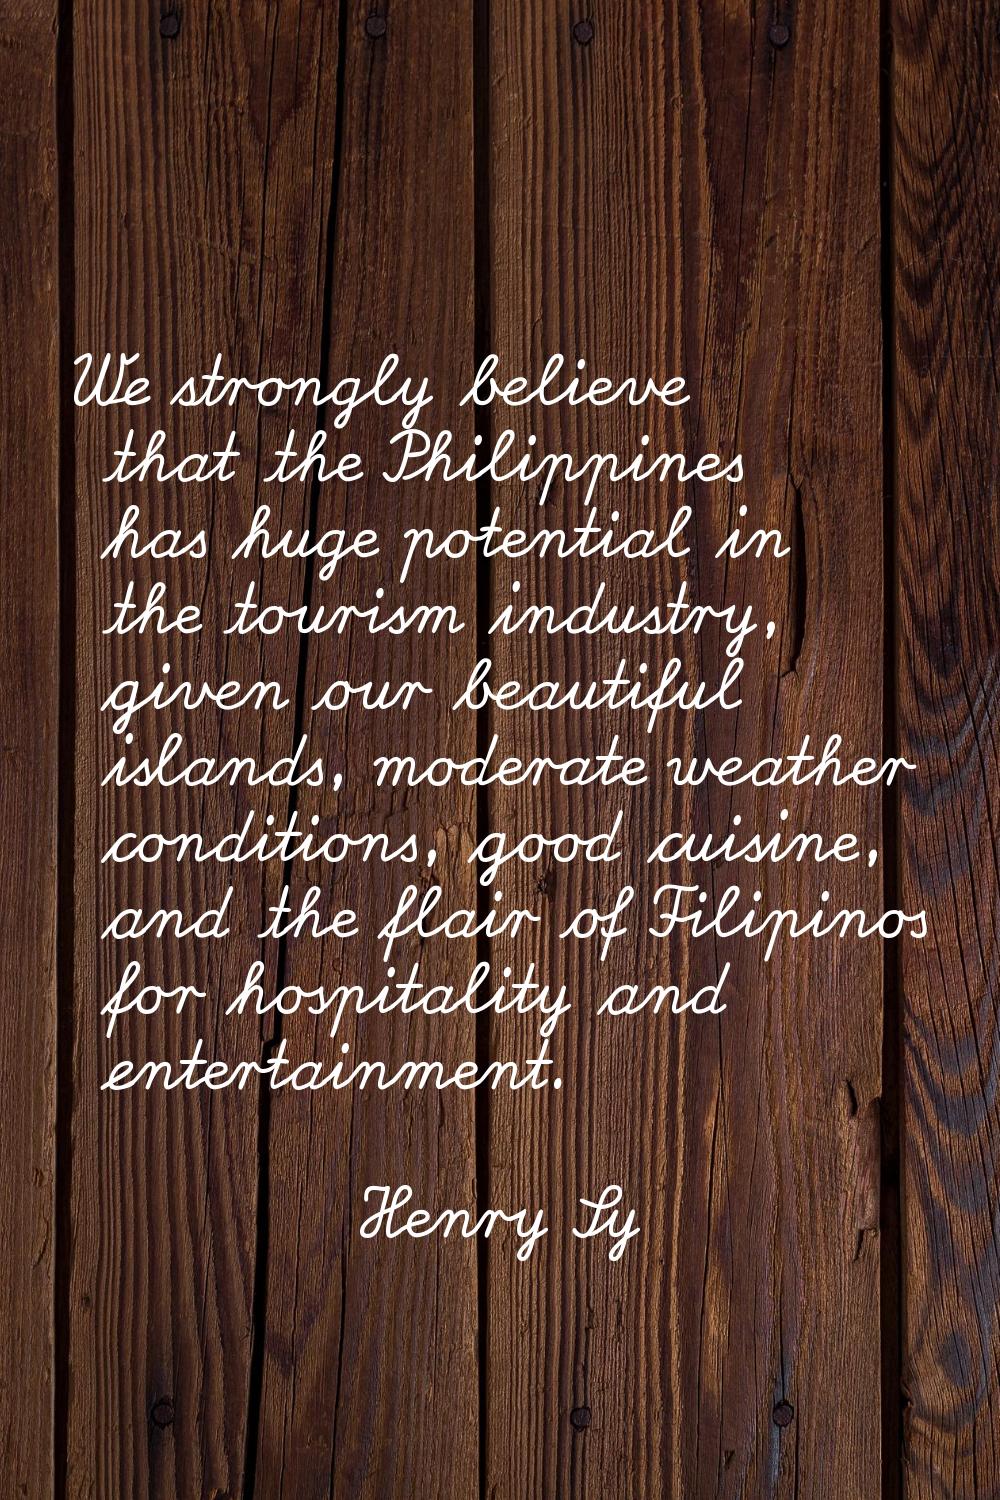 We strongly believe that the Philippines has huge potential in the tourism industry, given our beau